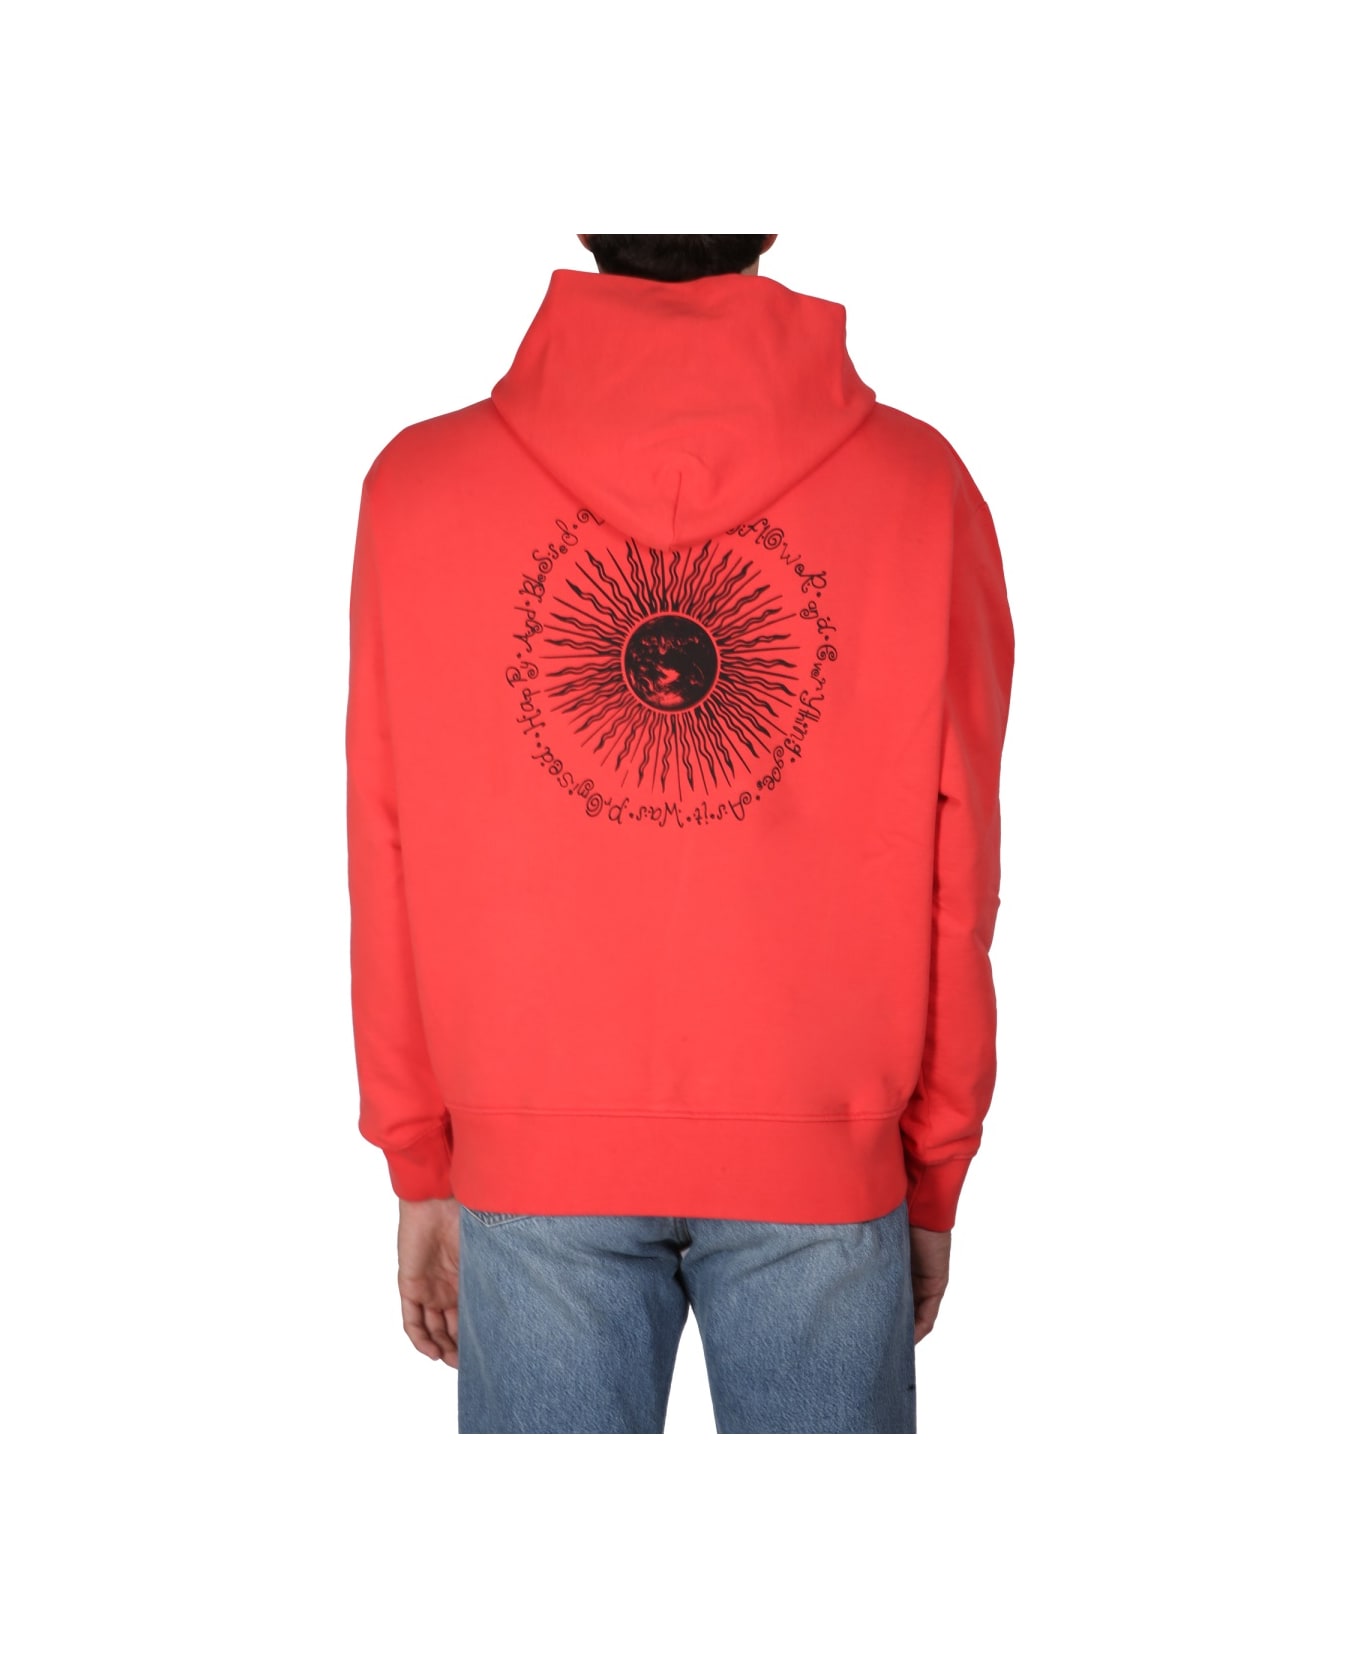 Sunflower Sweatshirt With Logo Embroidery - RED